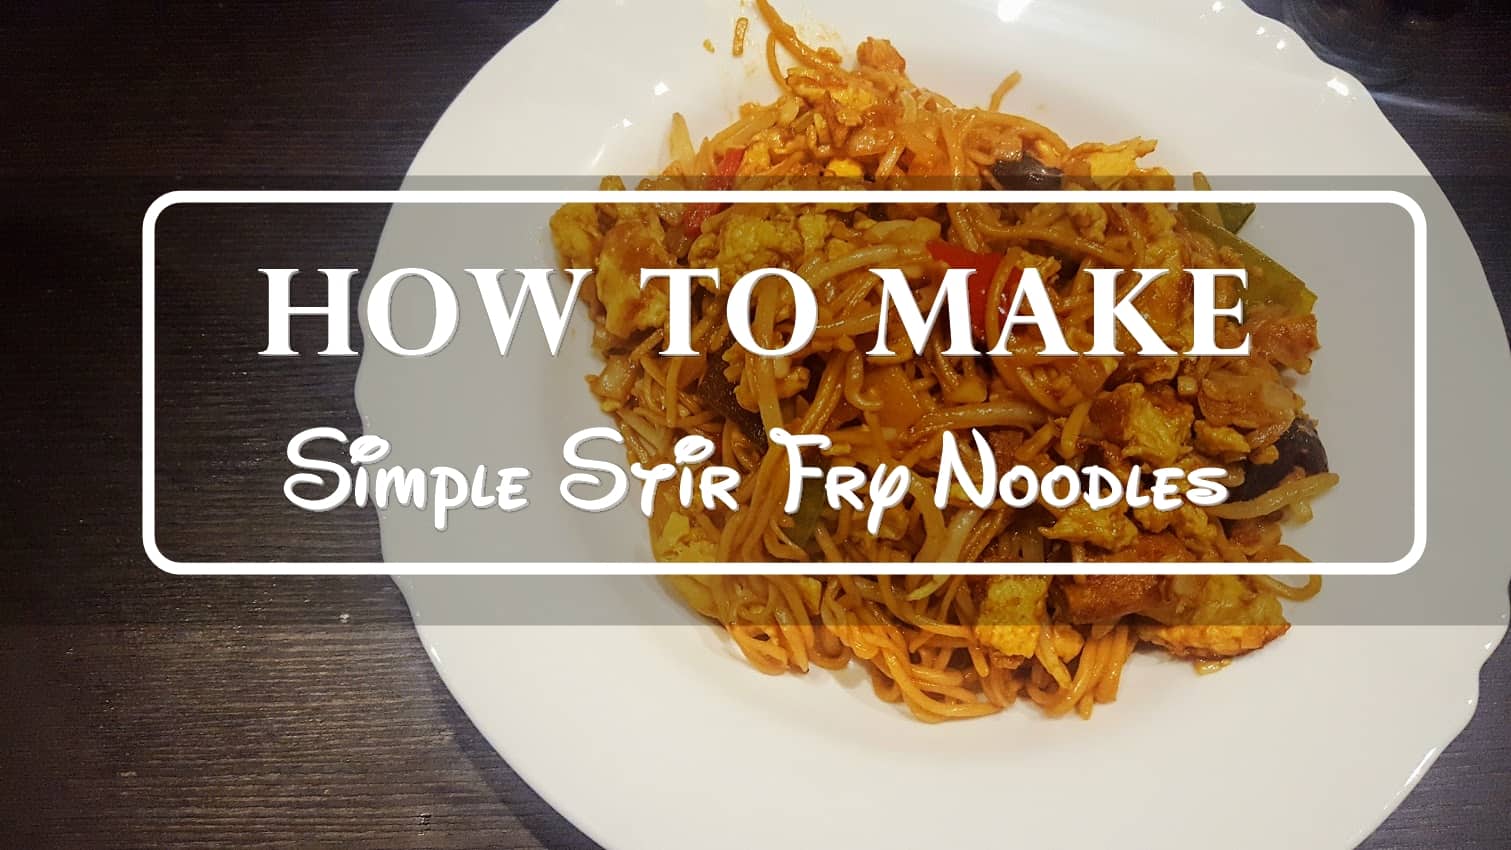 How to make Simple Stir Fry Noodles